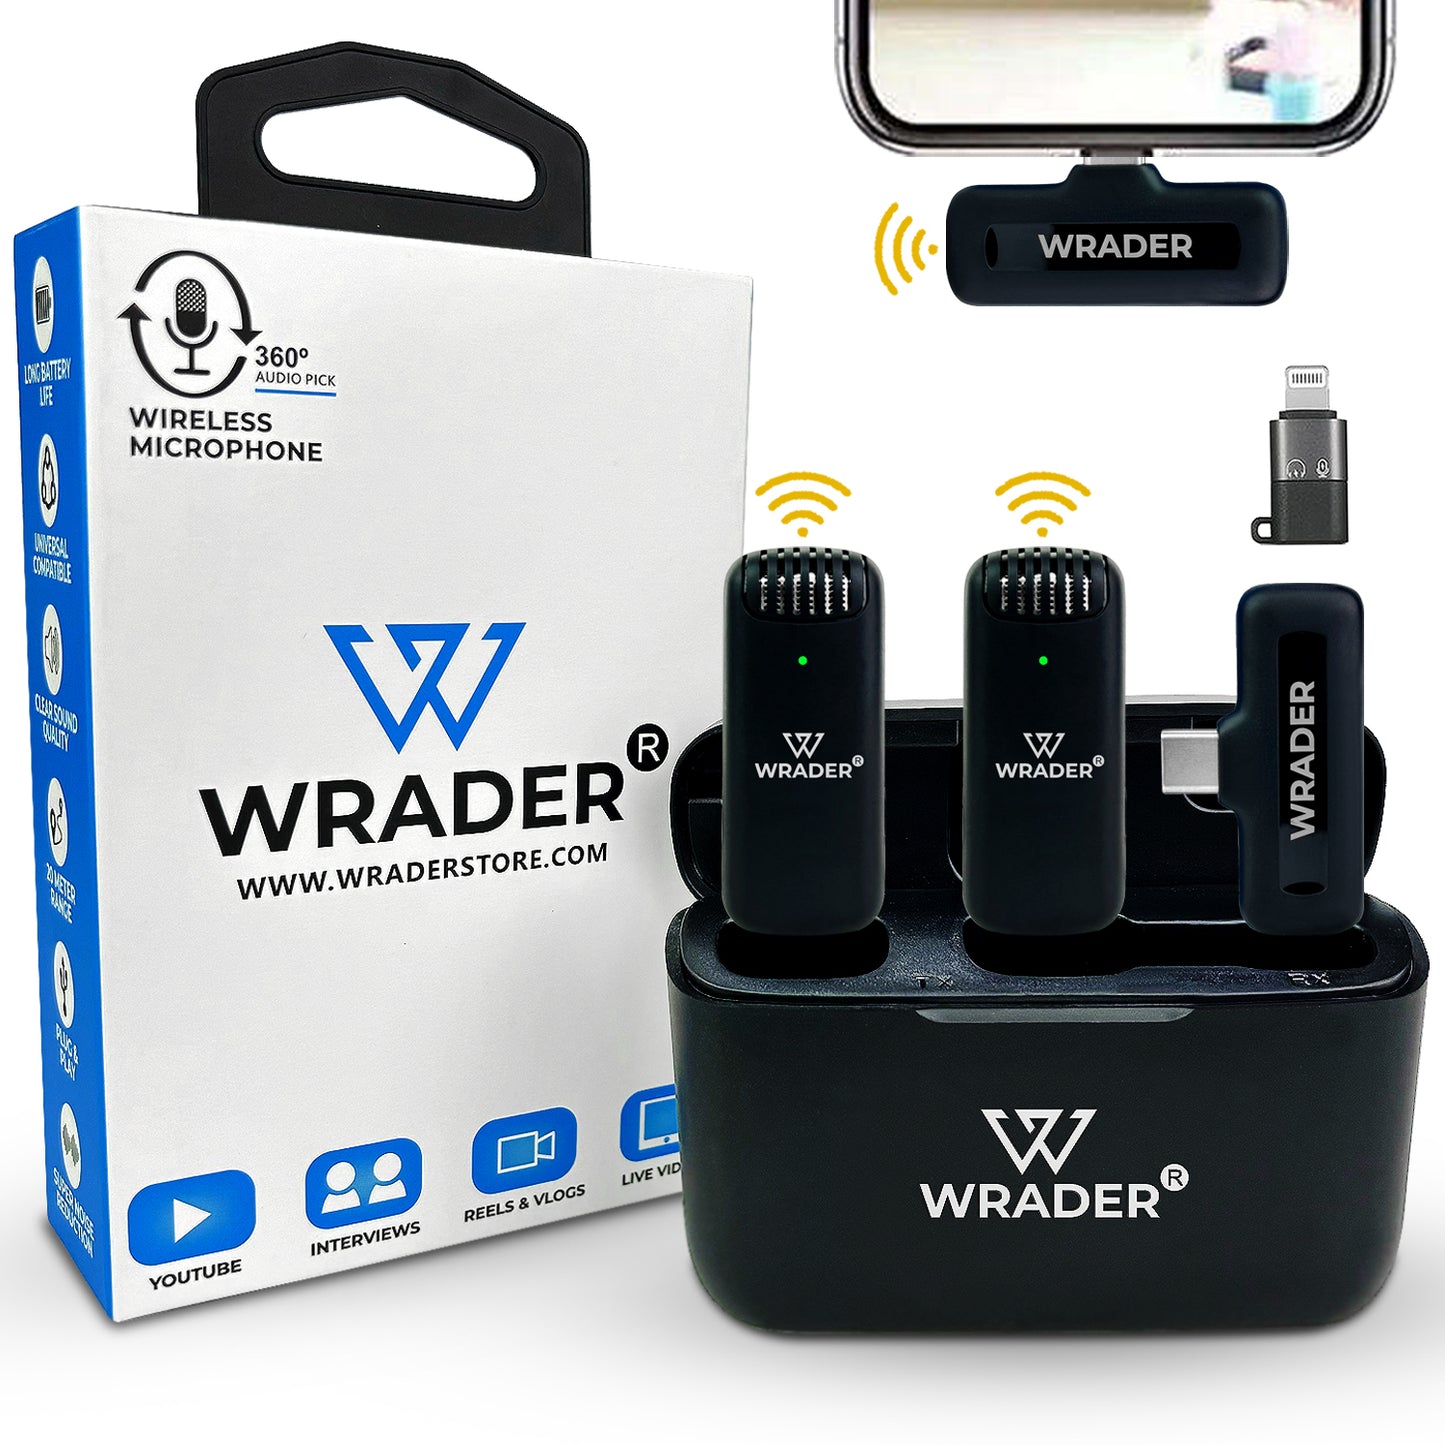 WRADER J13 Dual User Wireless Mic with Noise Cancellation for Type C Mobiles and iPhone Microphone